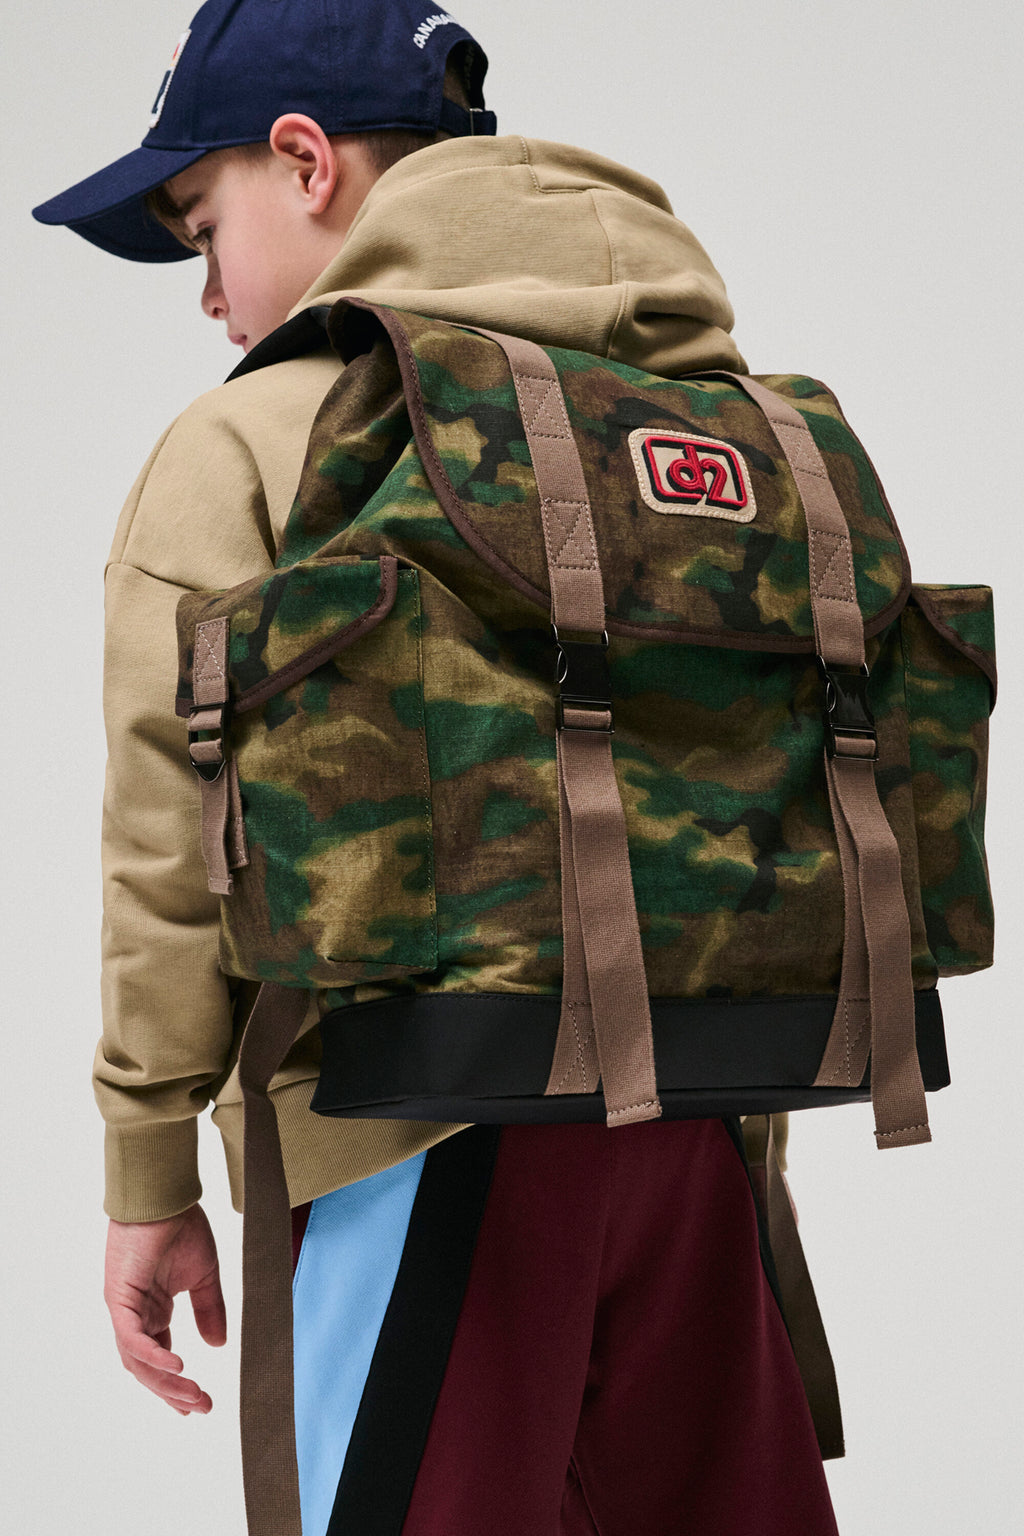 Camouflage allover military backpack with patches